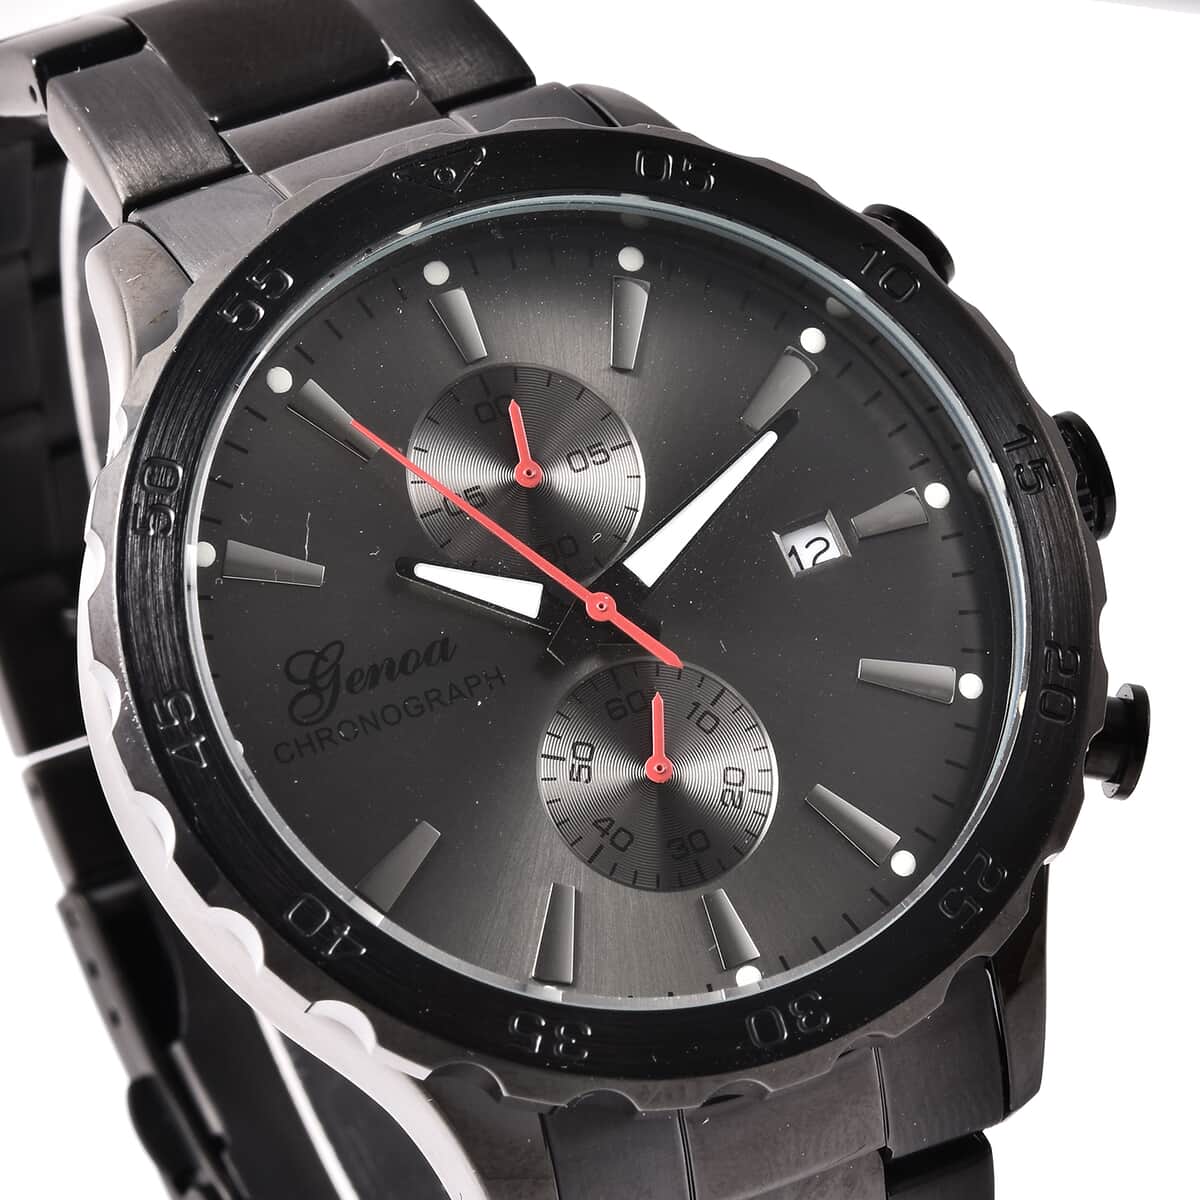 Genoa Multi-function Chronograph Watch with ION Plated Black Stainless Steel Strap & Black Dial (45mm) image number 3